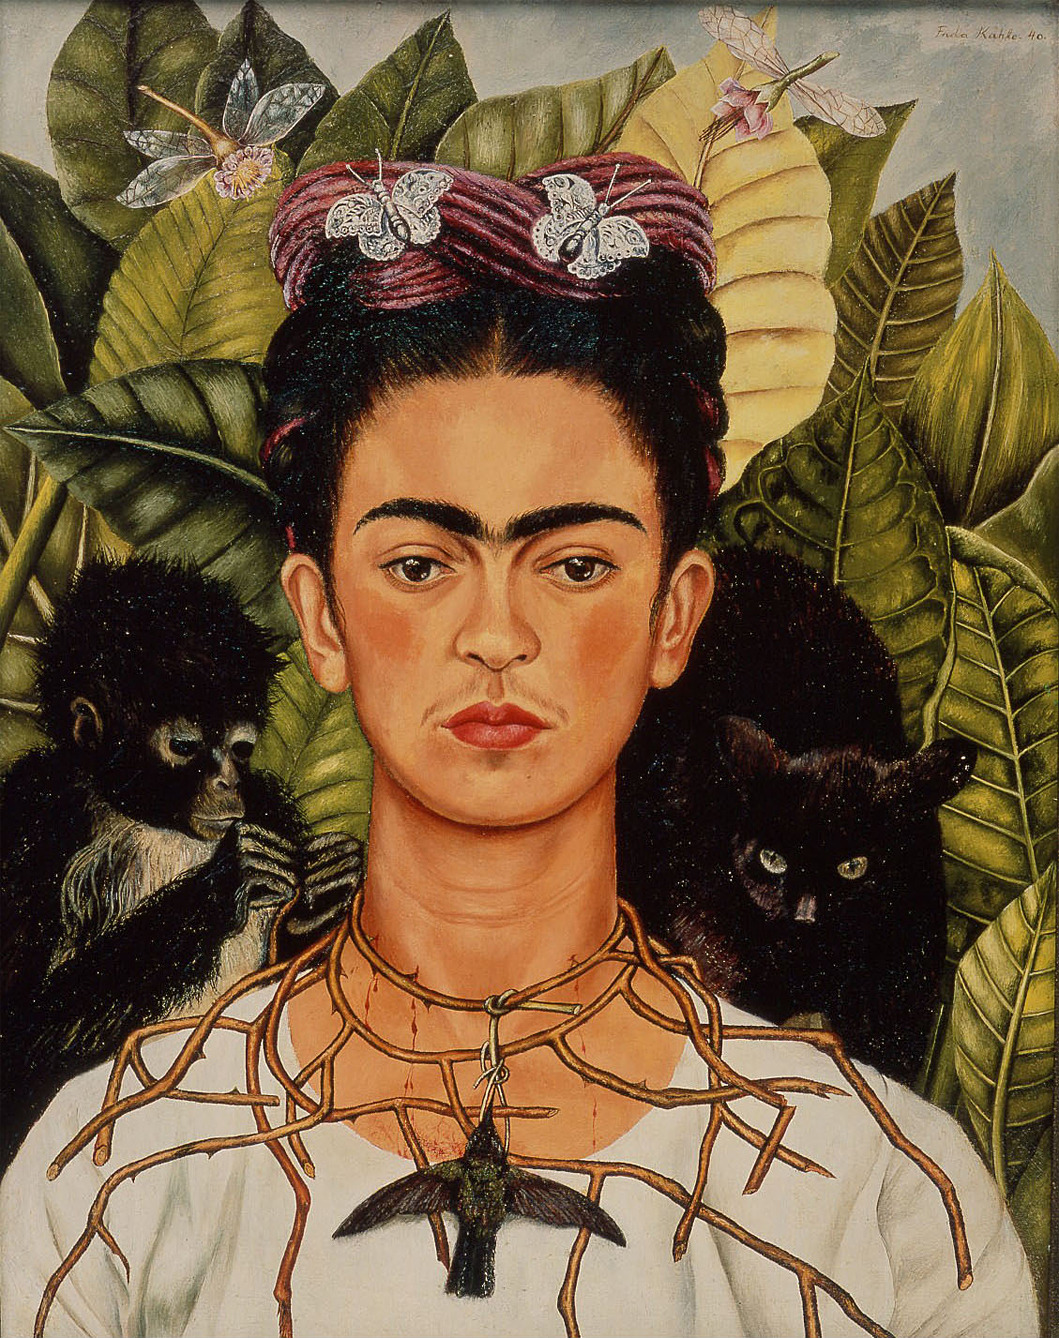 philamuseum:
“ Happy birthday to Mexican painter Frida Kahlo (1907–1954). Kahlo’s jewel-like self-portraits show her penchant for self-exploration and her affinity for reinventing herself. How do you choose to express your identity?
“Self-Portrait...